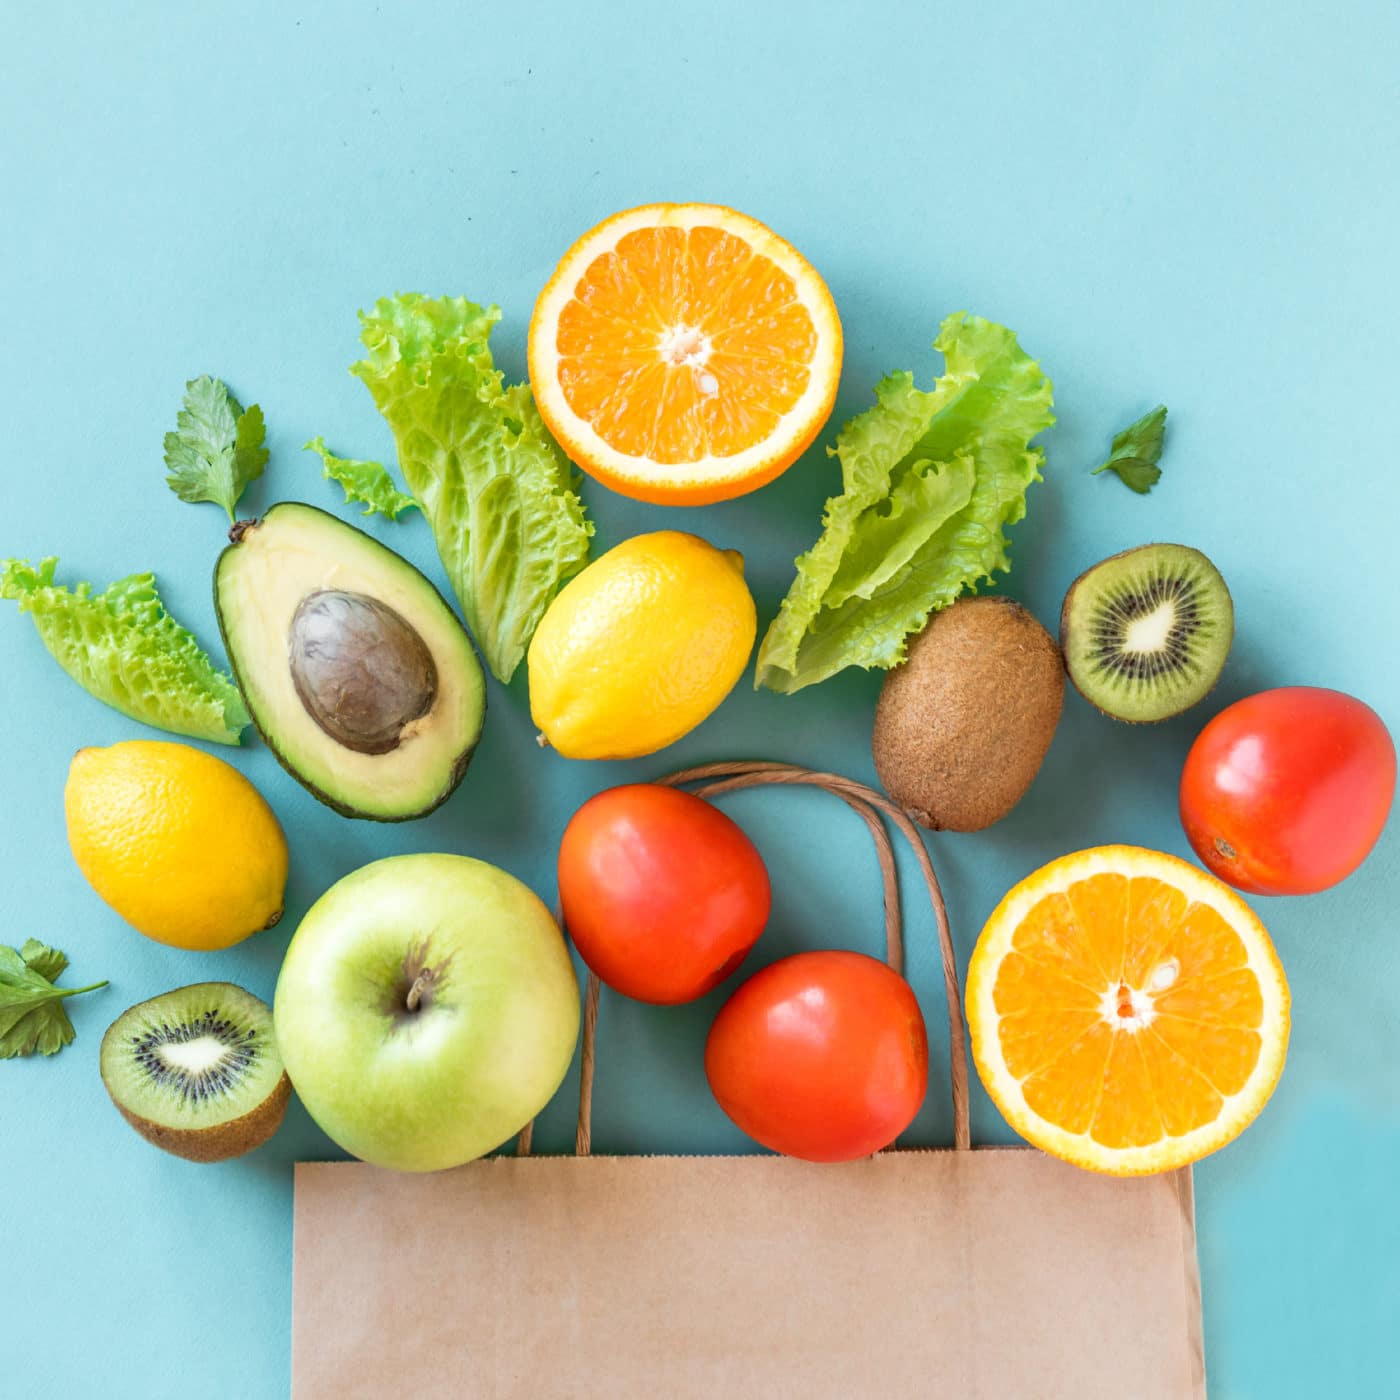 Healthy food background. Healthy food in paper bag vegetables and fruits on blue, copy space. Shopping food supermarket concept.